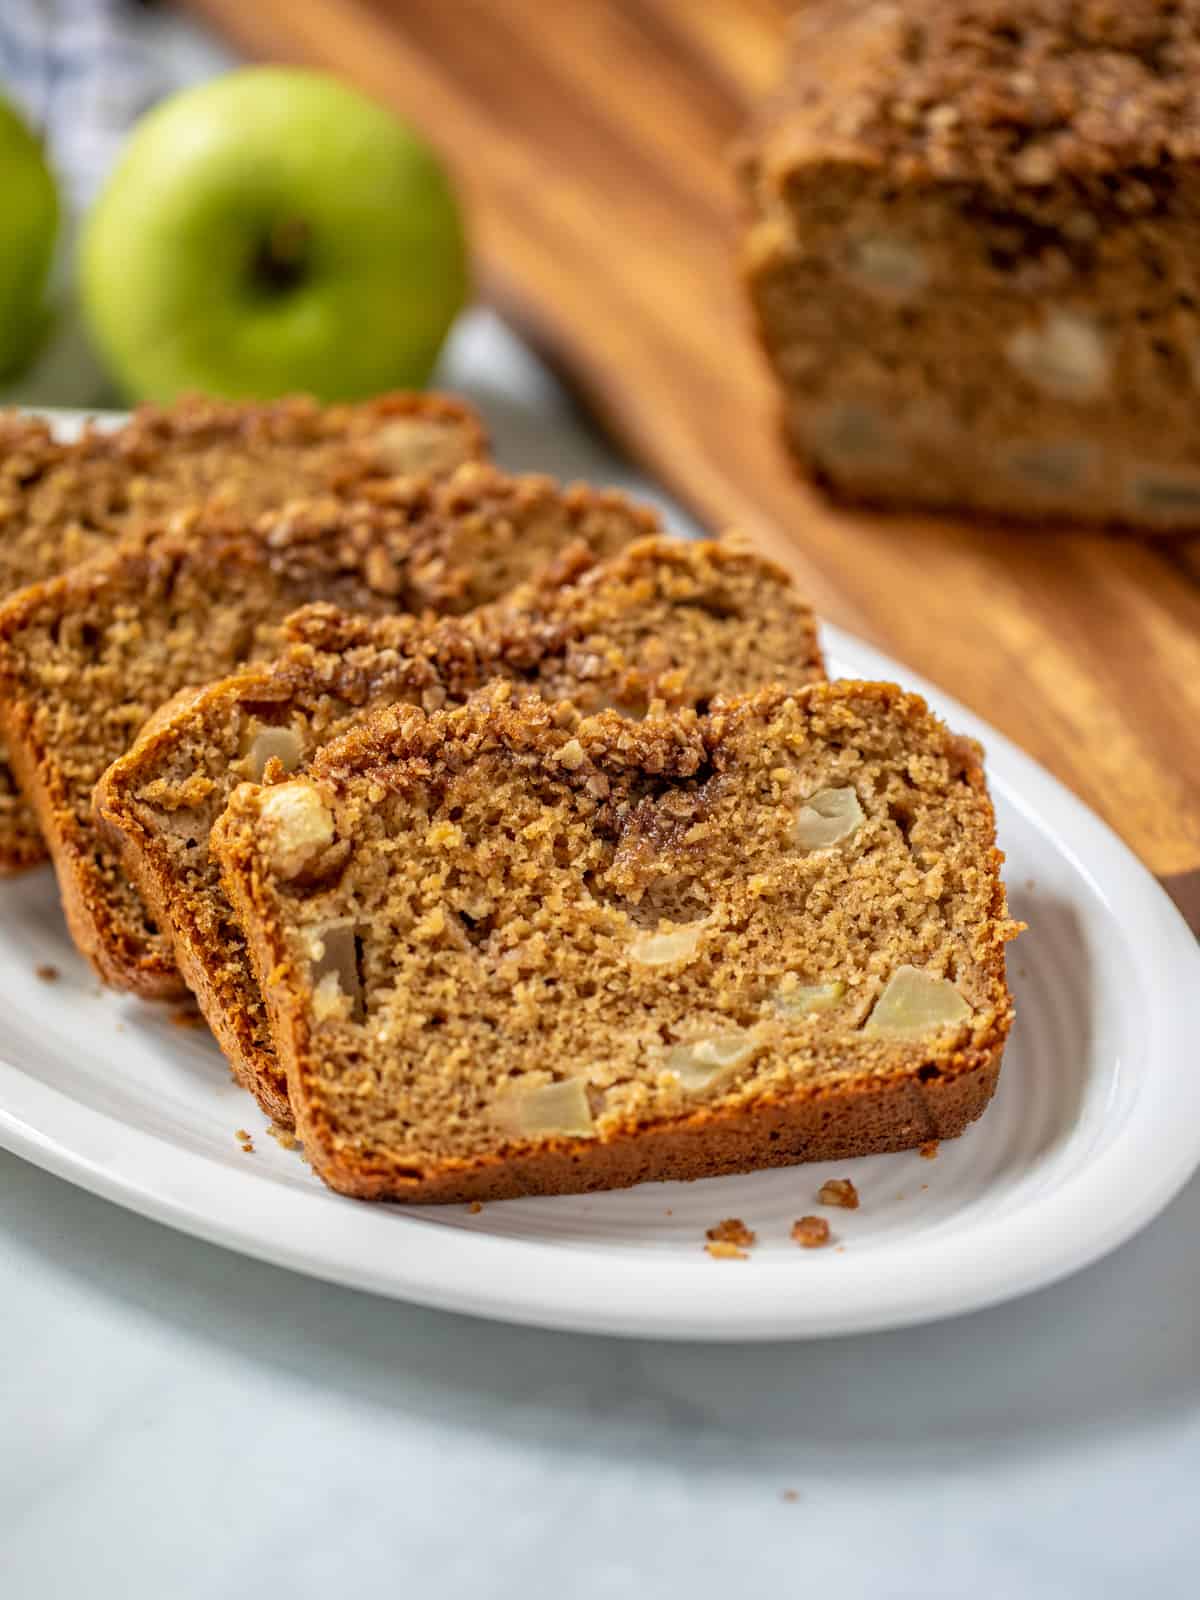 Sliced apple bread with streusel on white platter with granny smith apples in background.